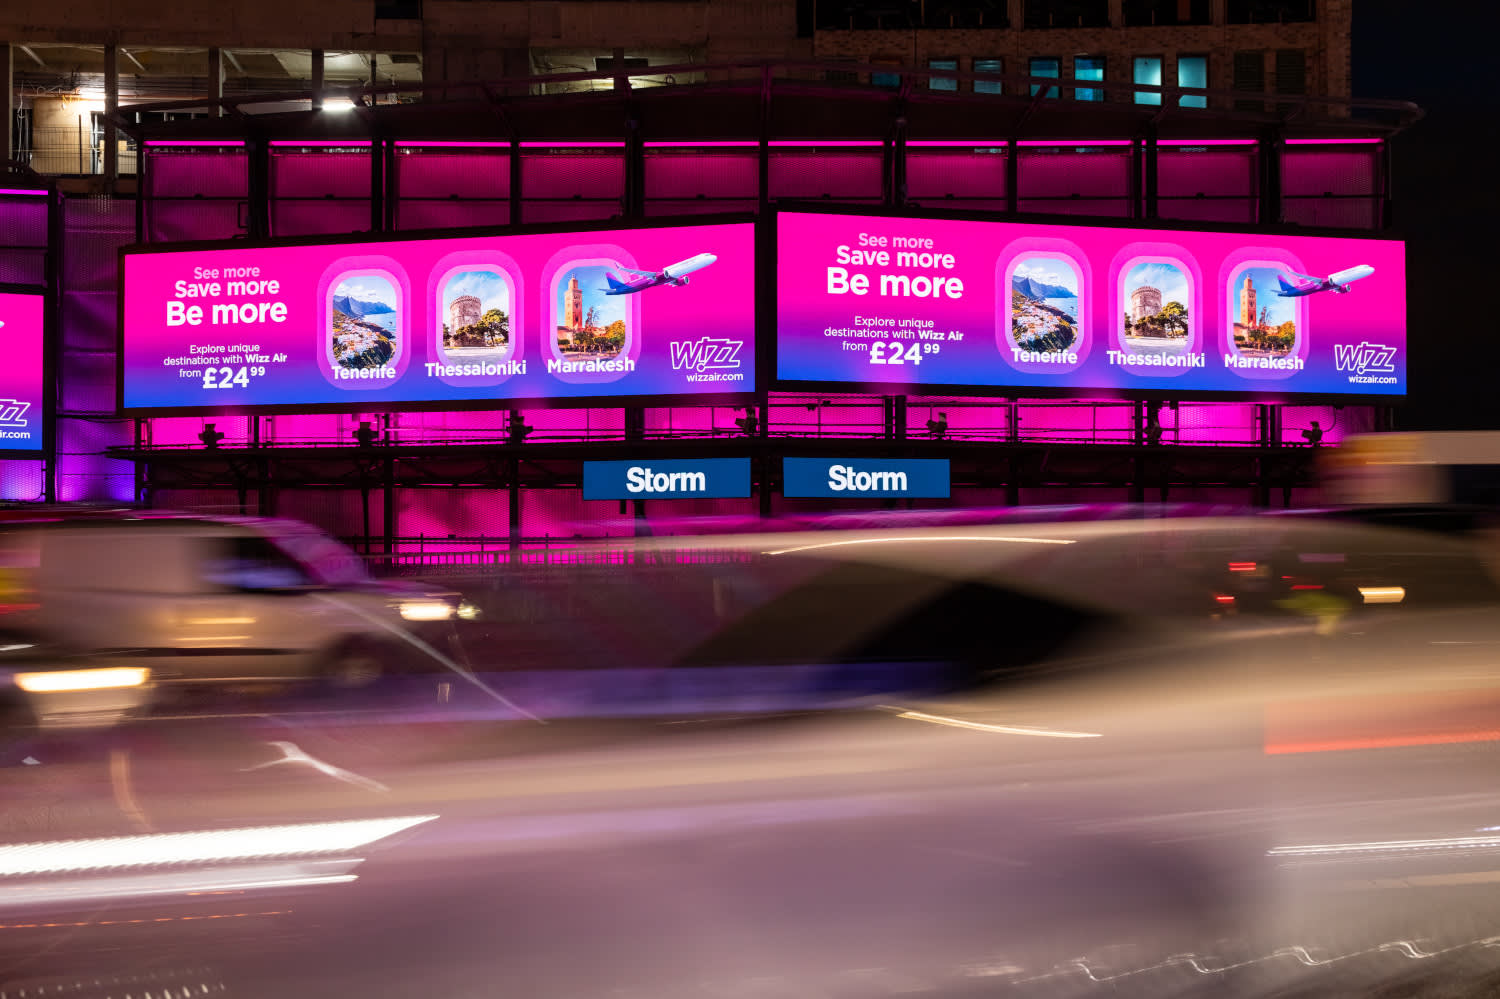 Storm Cromination in London displaying a bright pink and purple Wizz Air campaign at night